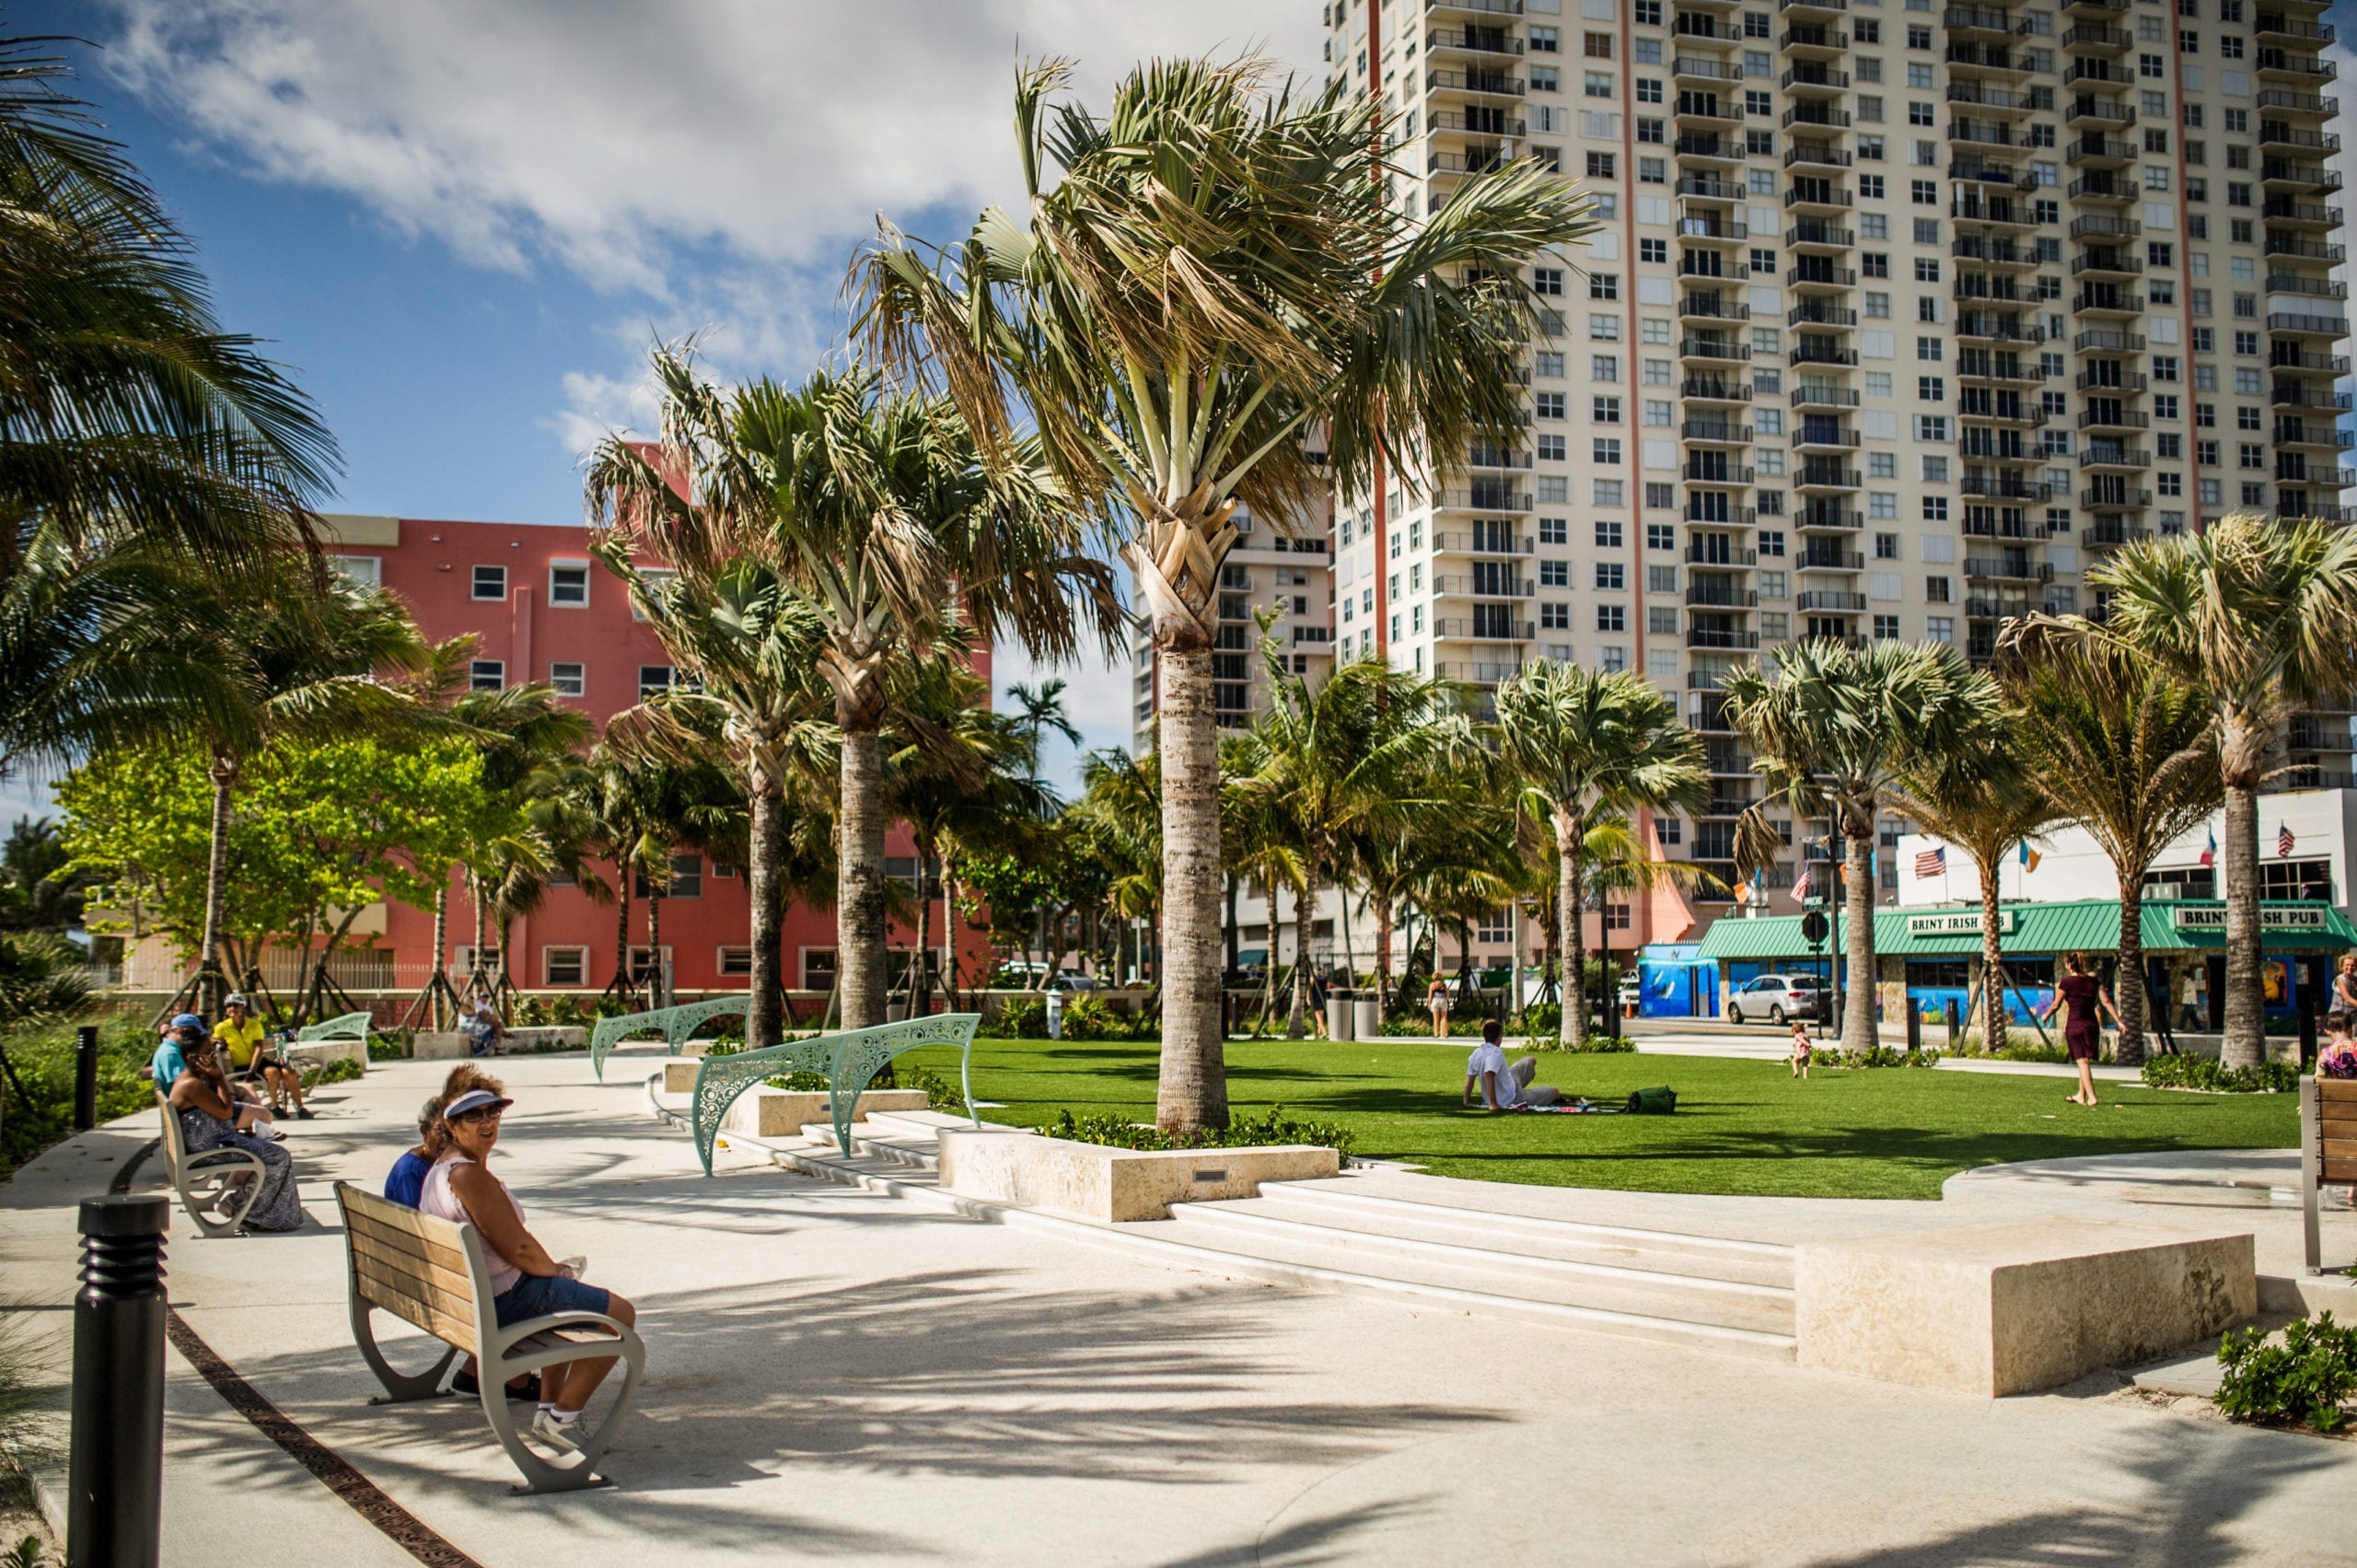 EDSA Pompano Beach Boulevard  Walkway with palm trees lining it with people sitting on benches and in a park area in the center